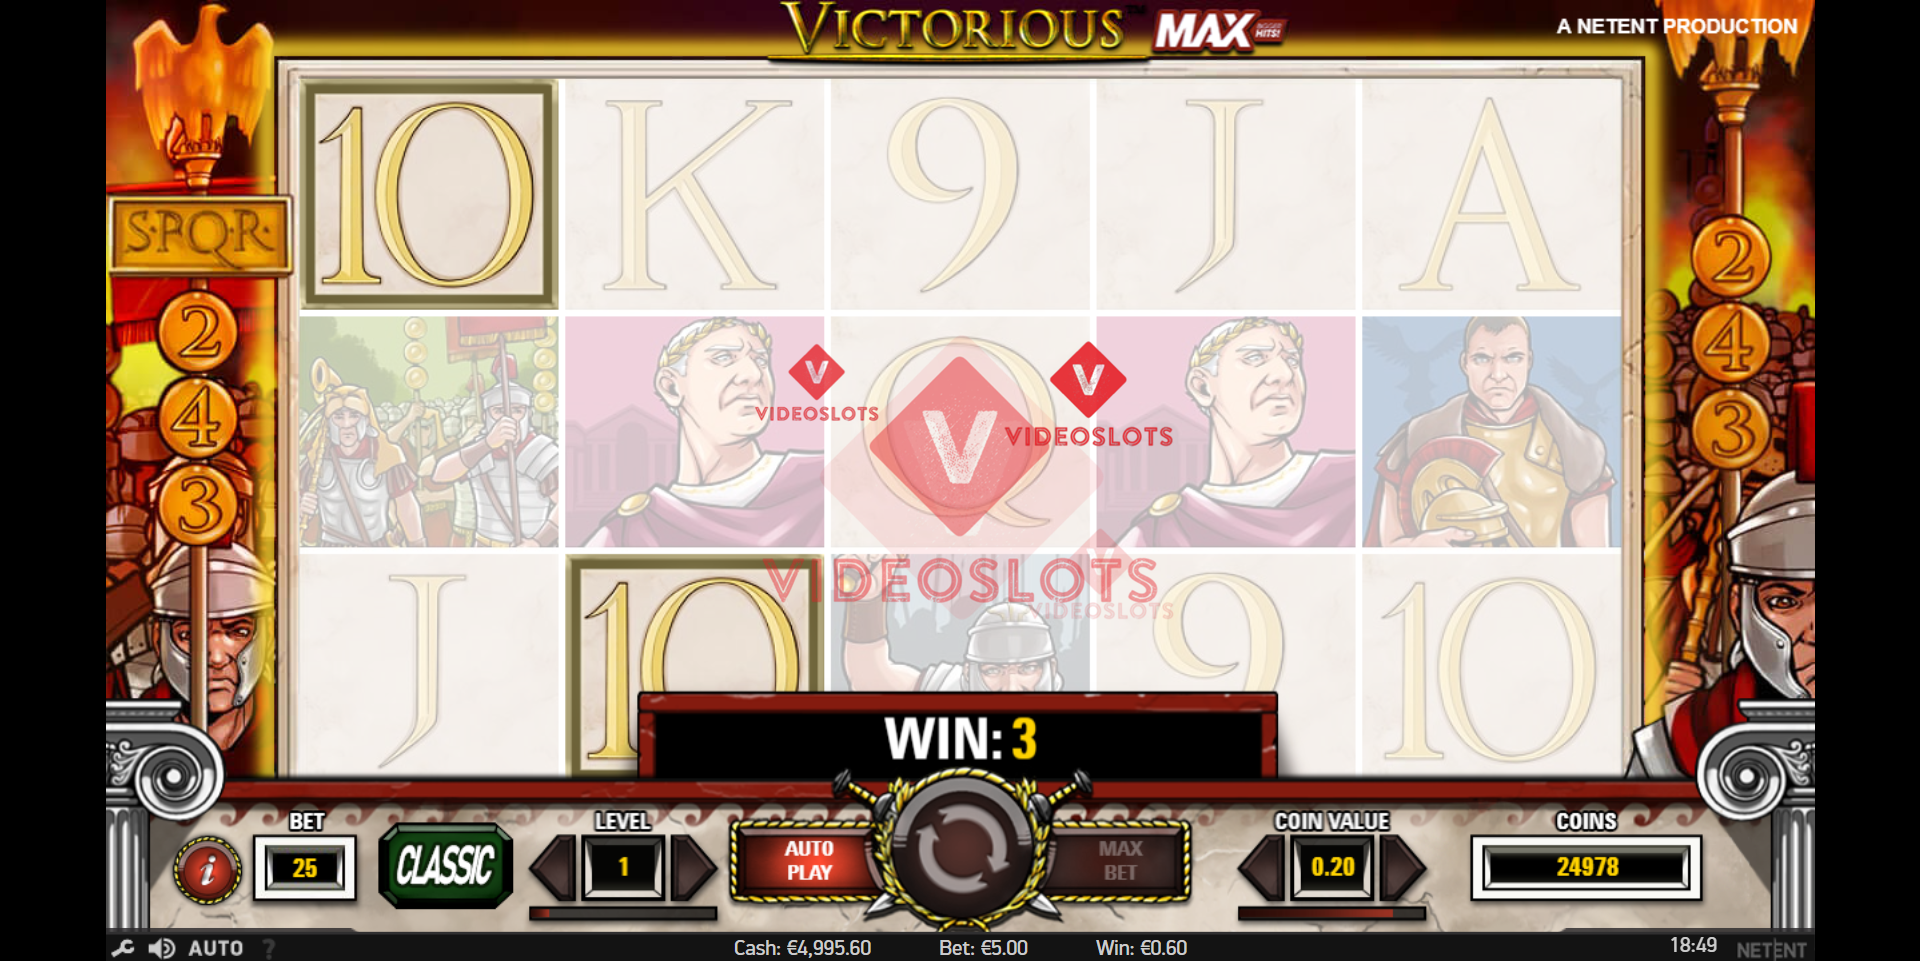 Base Game for Victorious MAX slot from NetEnt